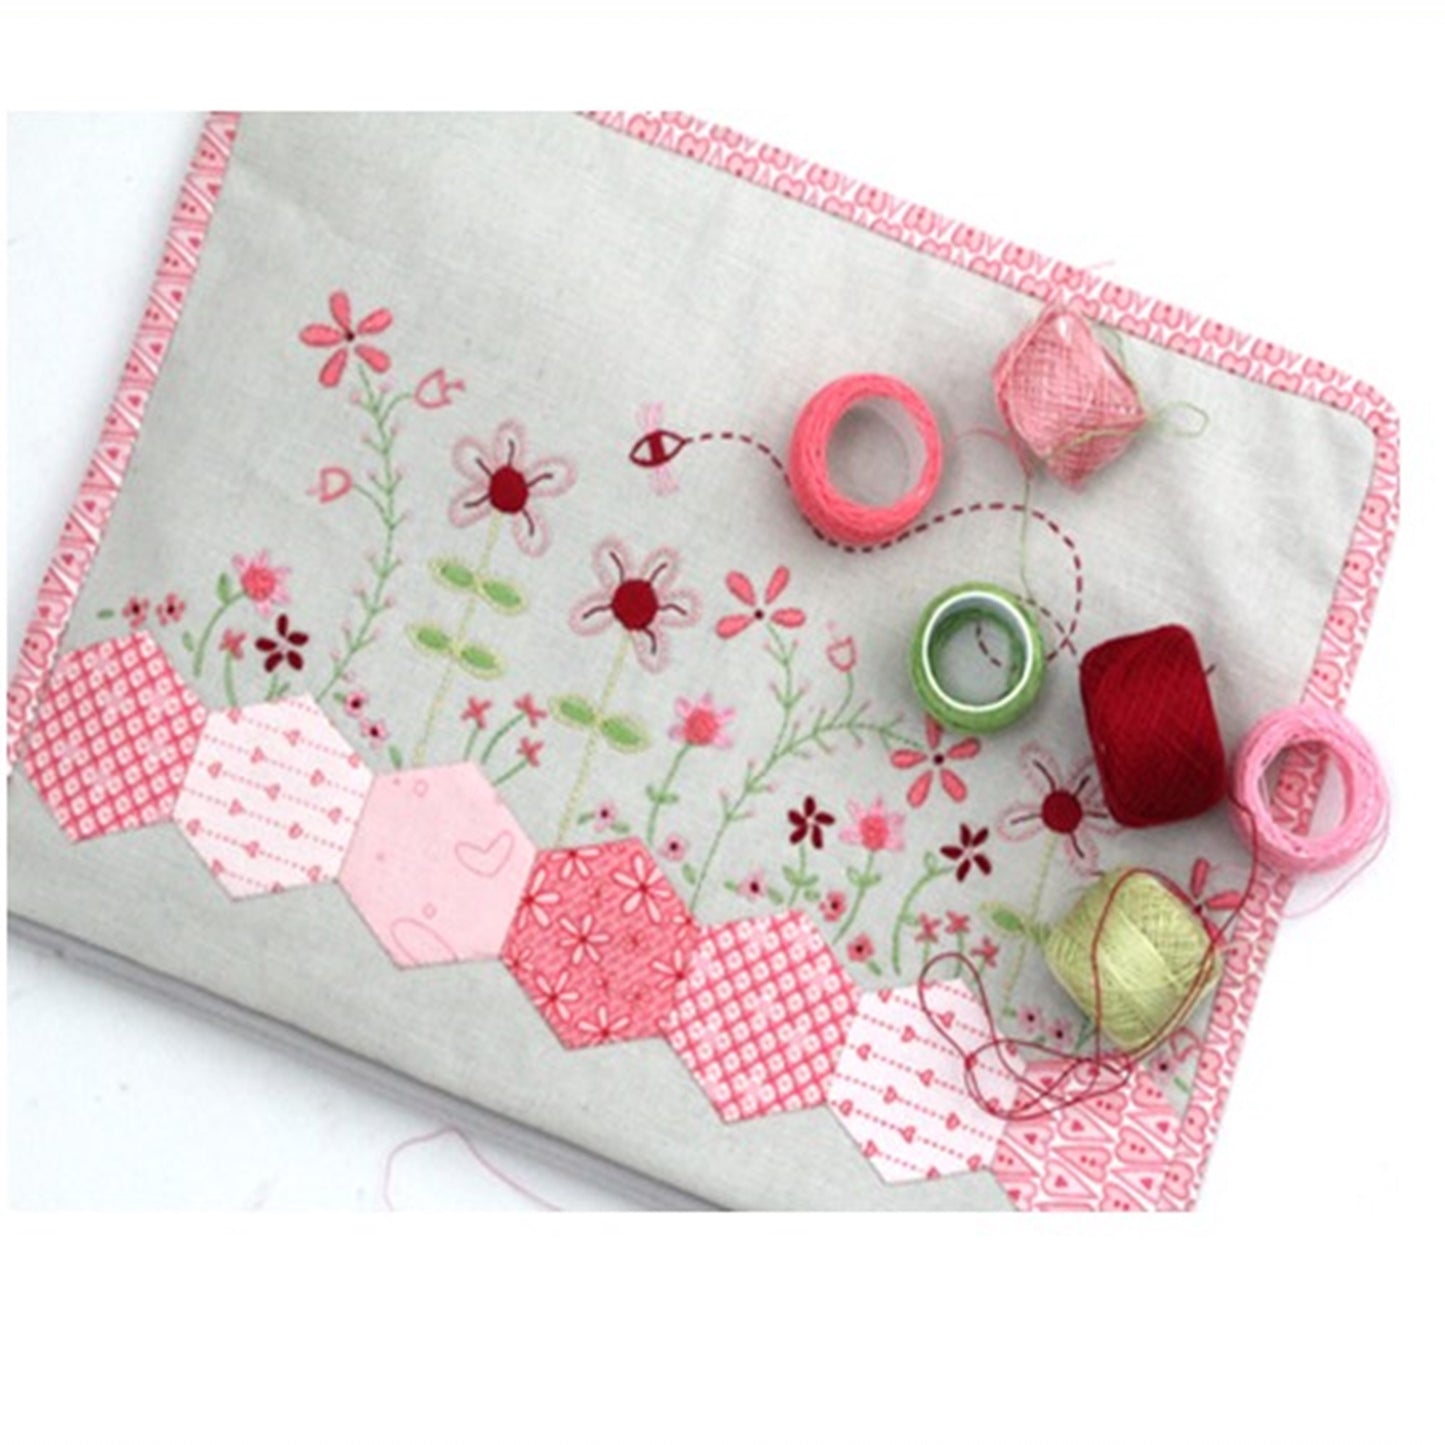 Just for Jenny zipper pouch project bag EPP embroidery Hugs 'N Kisses pattern